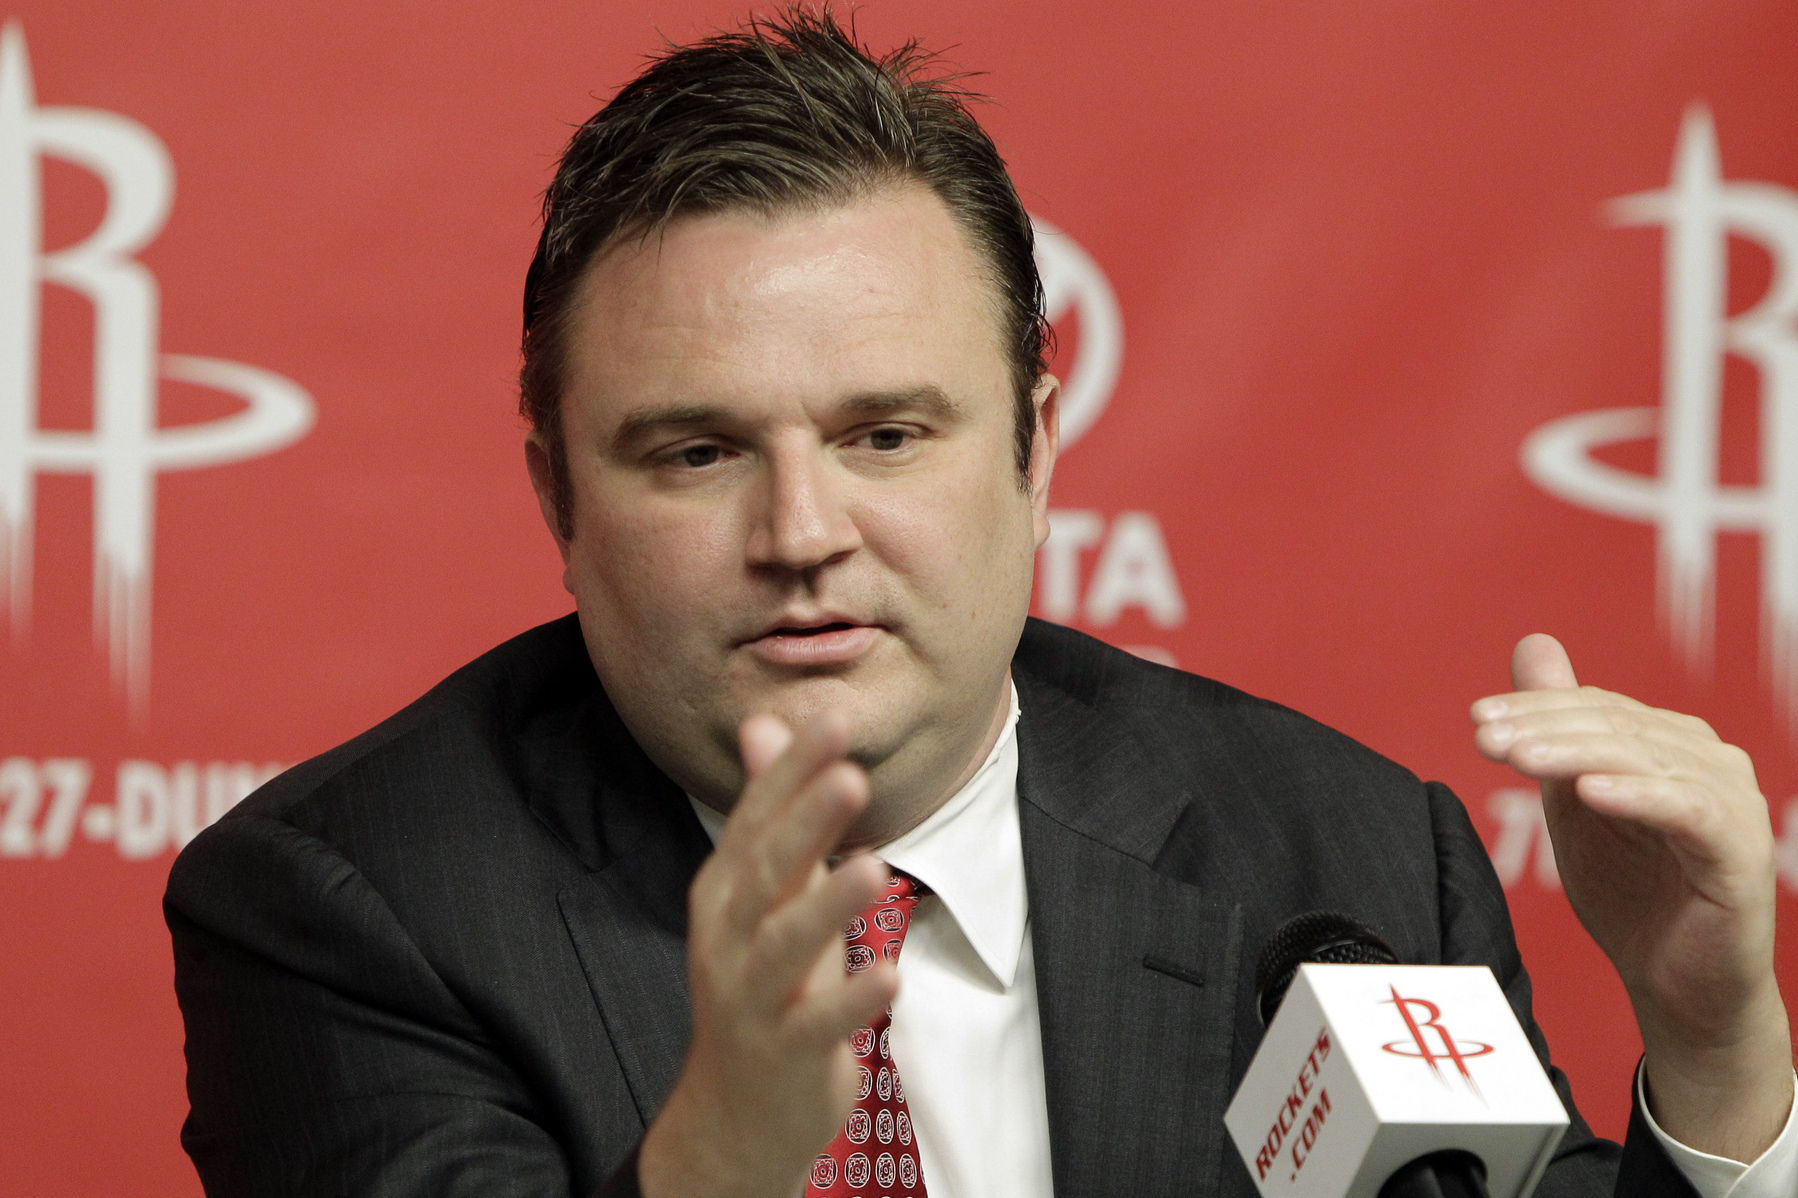 Daryl Morey is Deep into NFTs & Top Shot - The First Mint